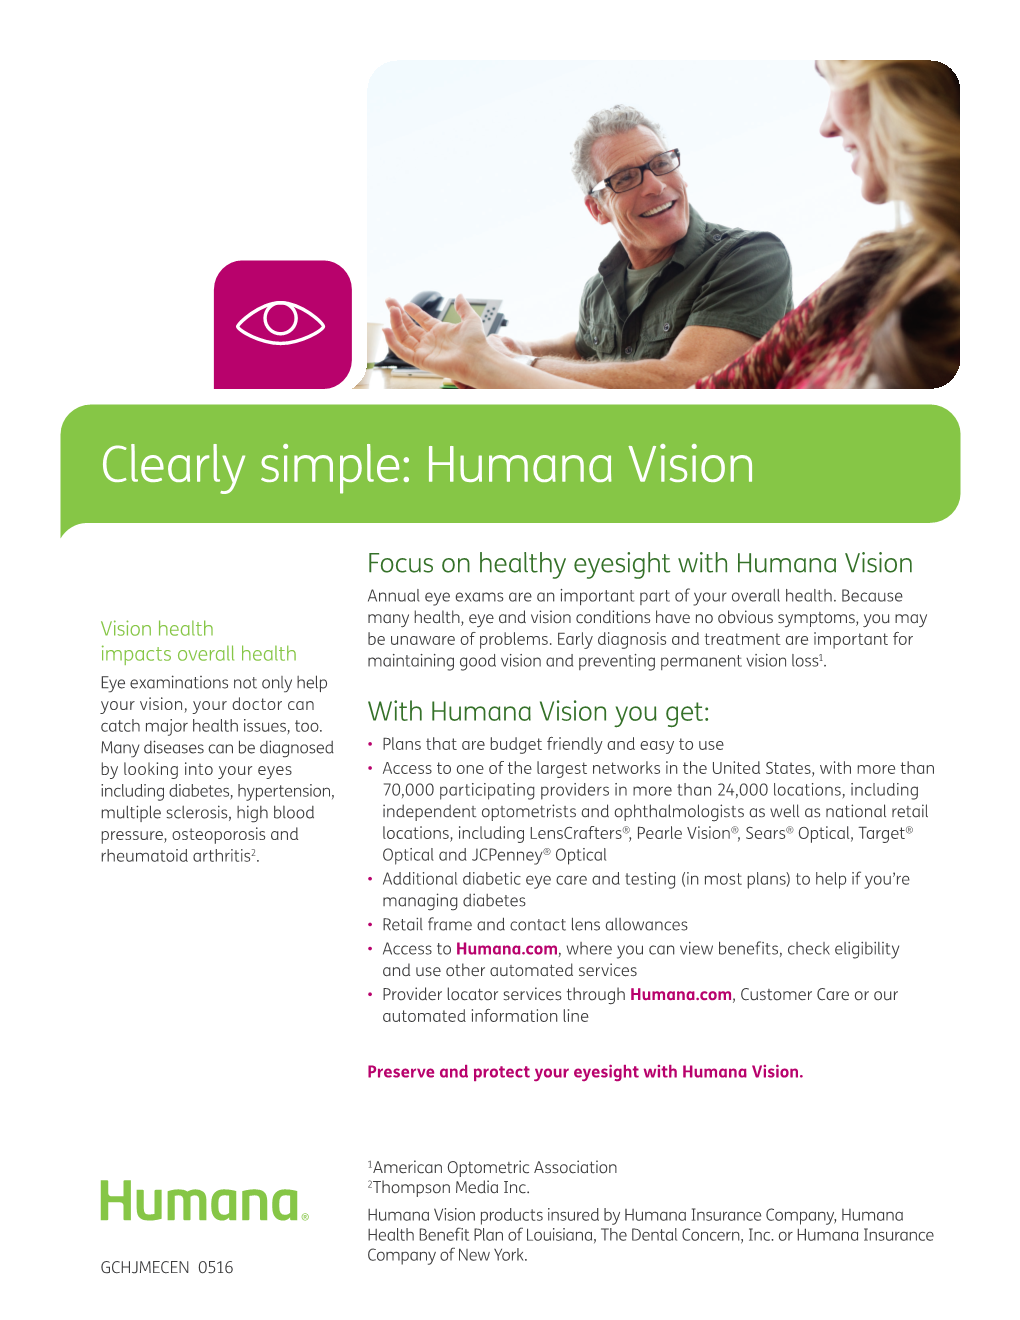 Clearly Simple: Humana Vision